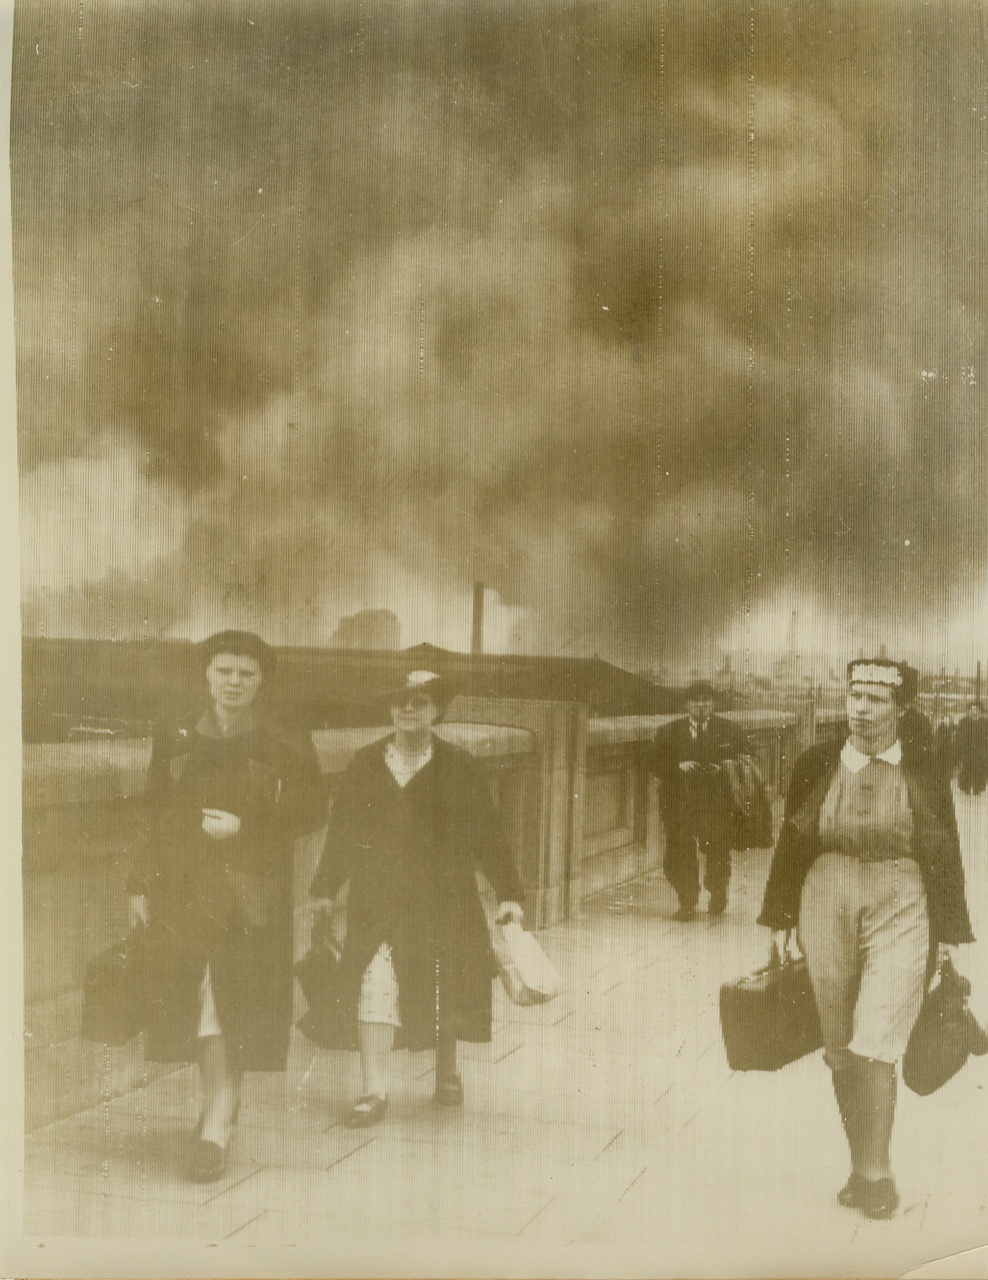 Women Leave Blazing Dock Area, 9/9/1940  LONDON -- Apparently not the least bit panicked by the German onslaught, these women, with faces set, leave the London dock area after air raids made it a blazing inferno. Some 2,000 residents of this area were evacuated from their flame encircled homes by a flotilla of pleasure craft that enacted a miniature Dunkirque. Photo sent from London by radio on Sept. 9th. Credit: (ACME);